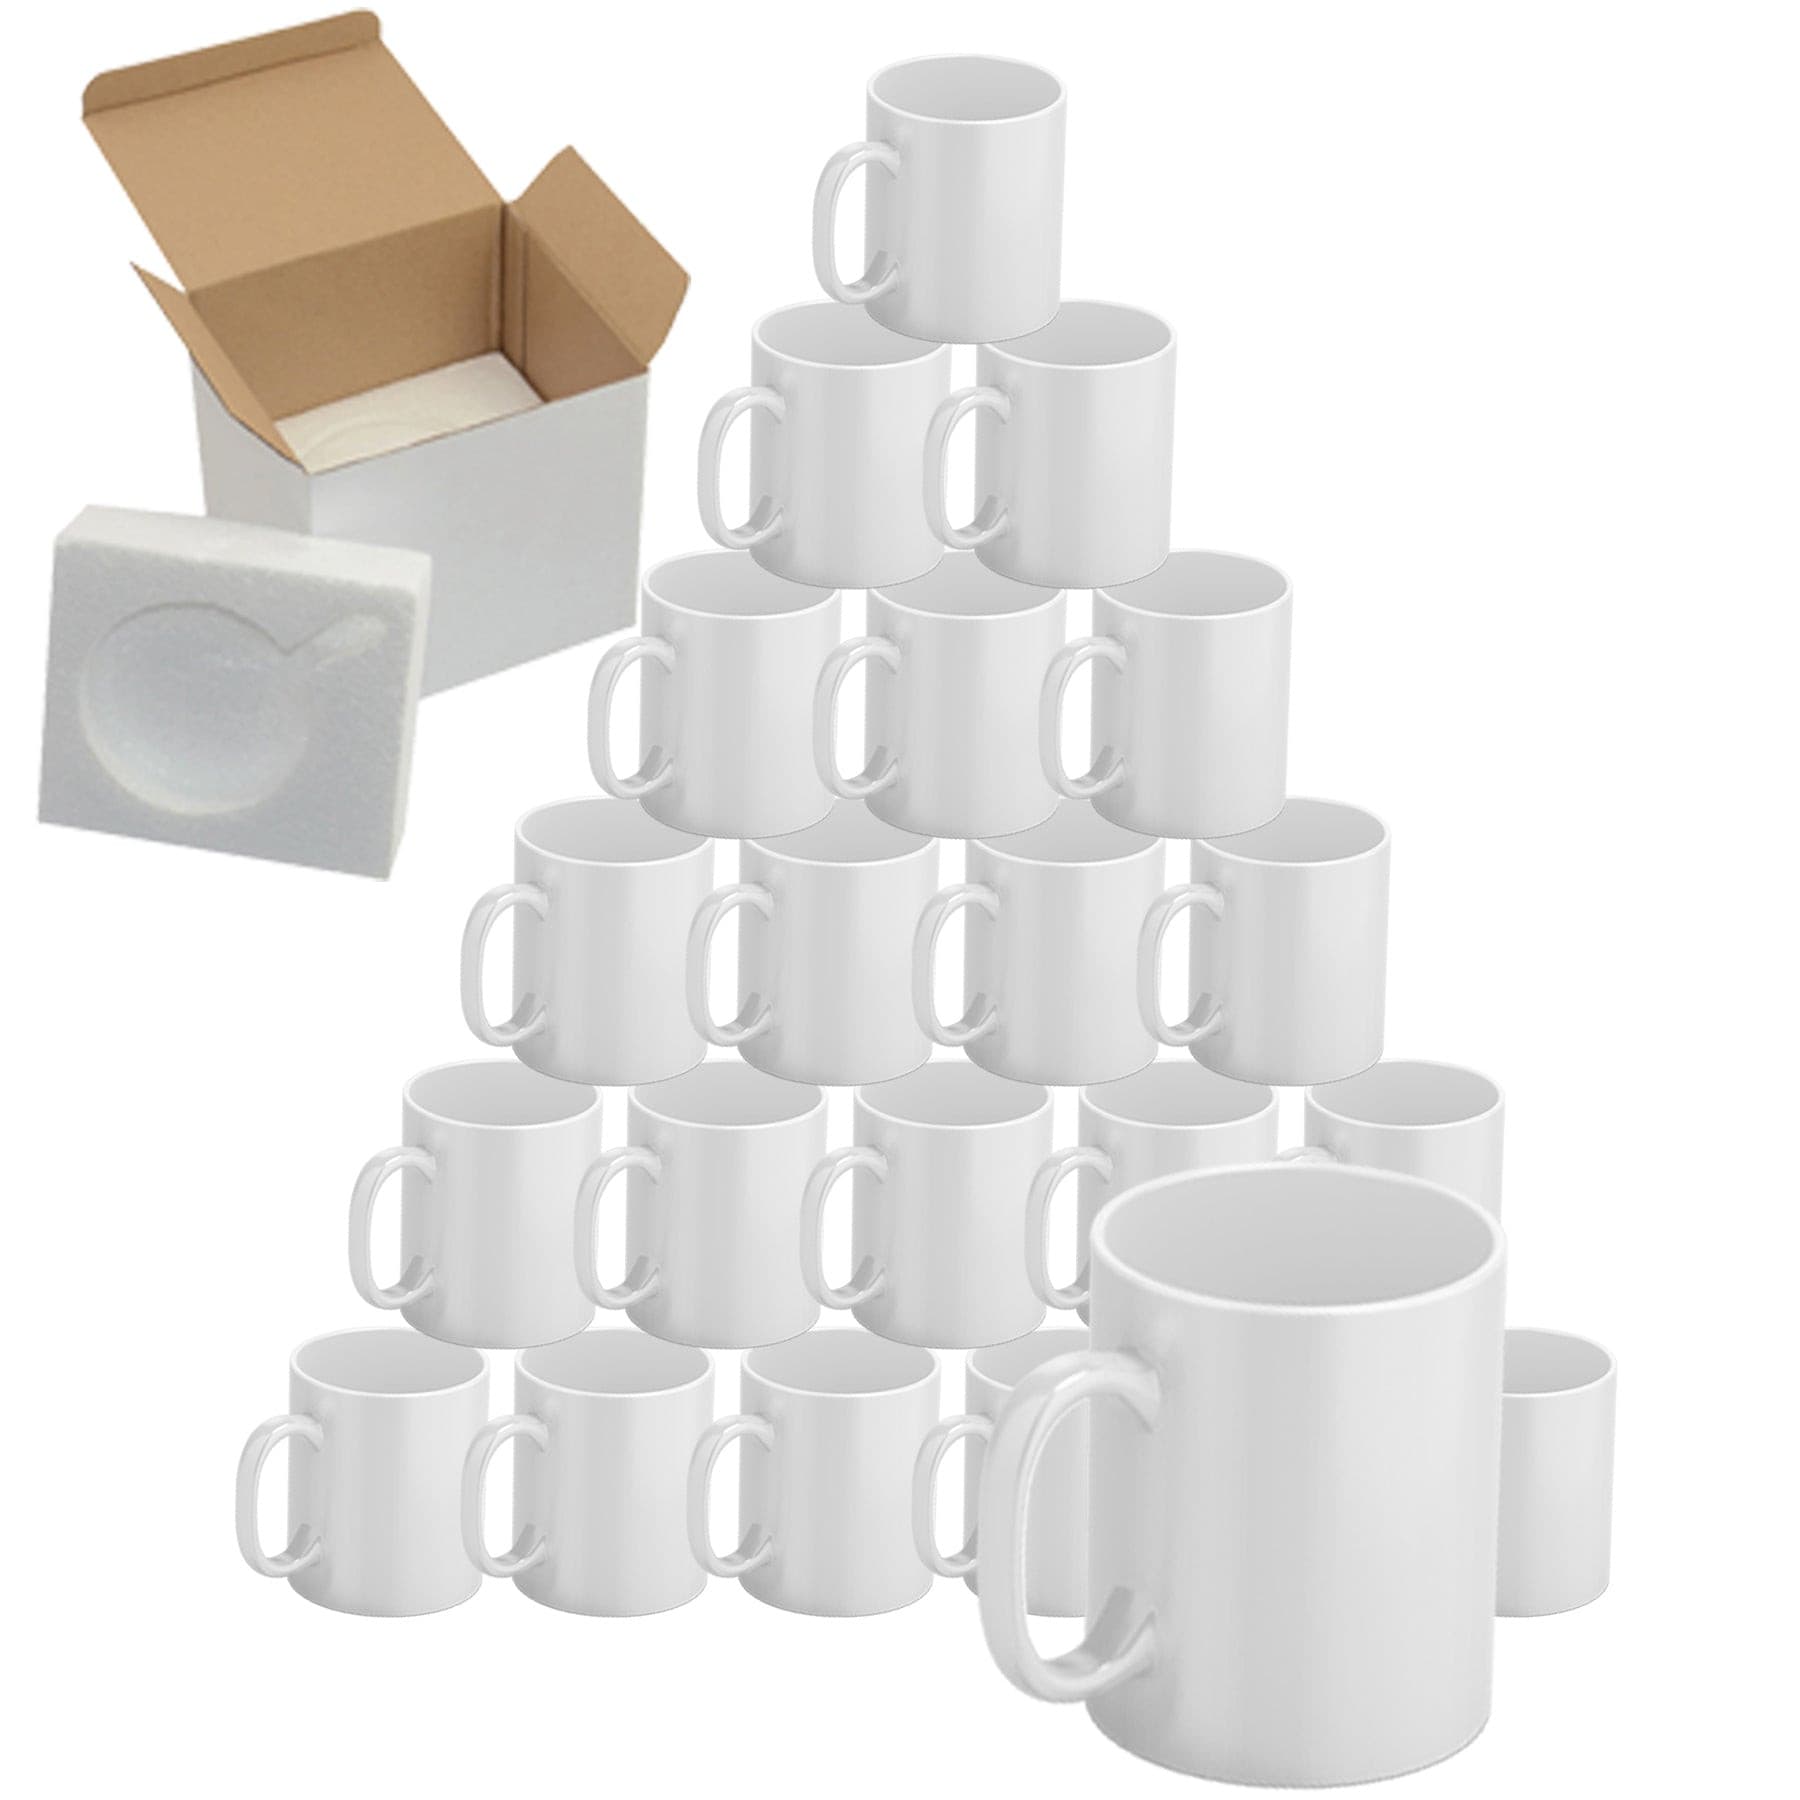 3.5 x 9 Sublimation Paper for 11oz Coffee Mugs - Compatible with